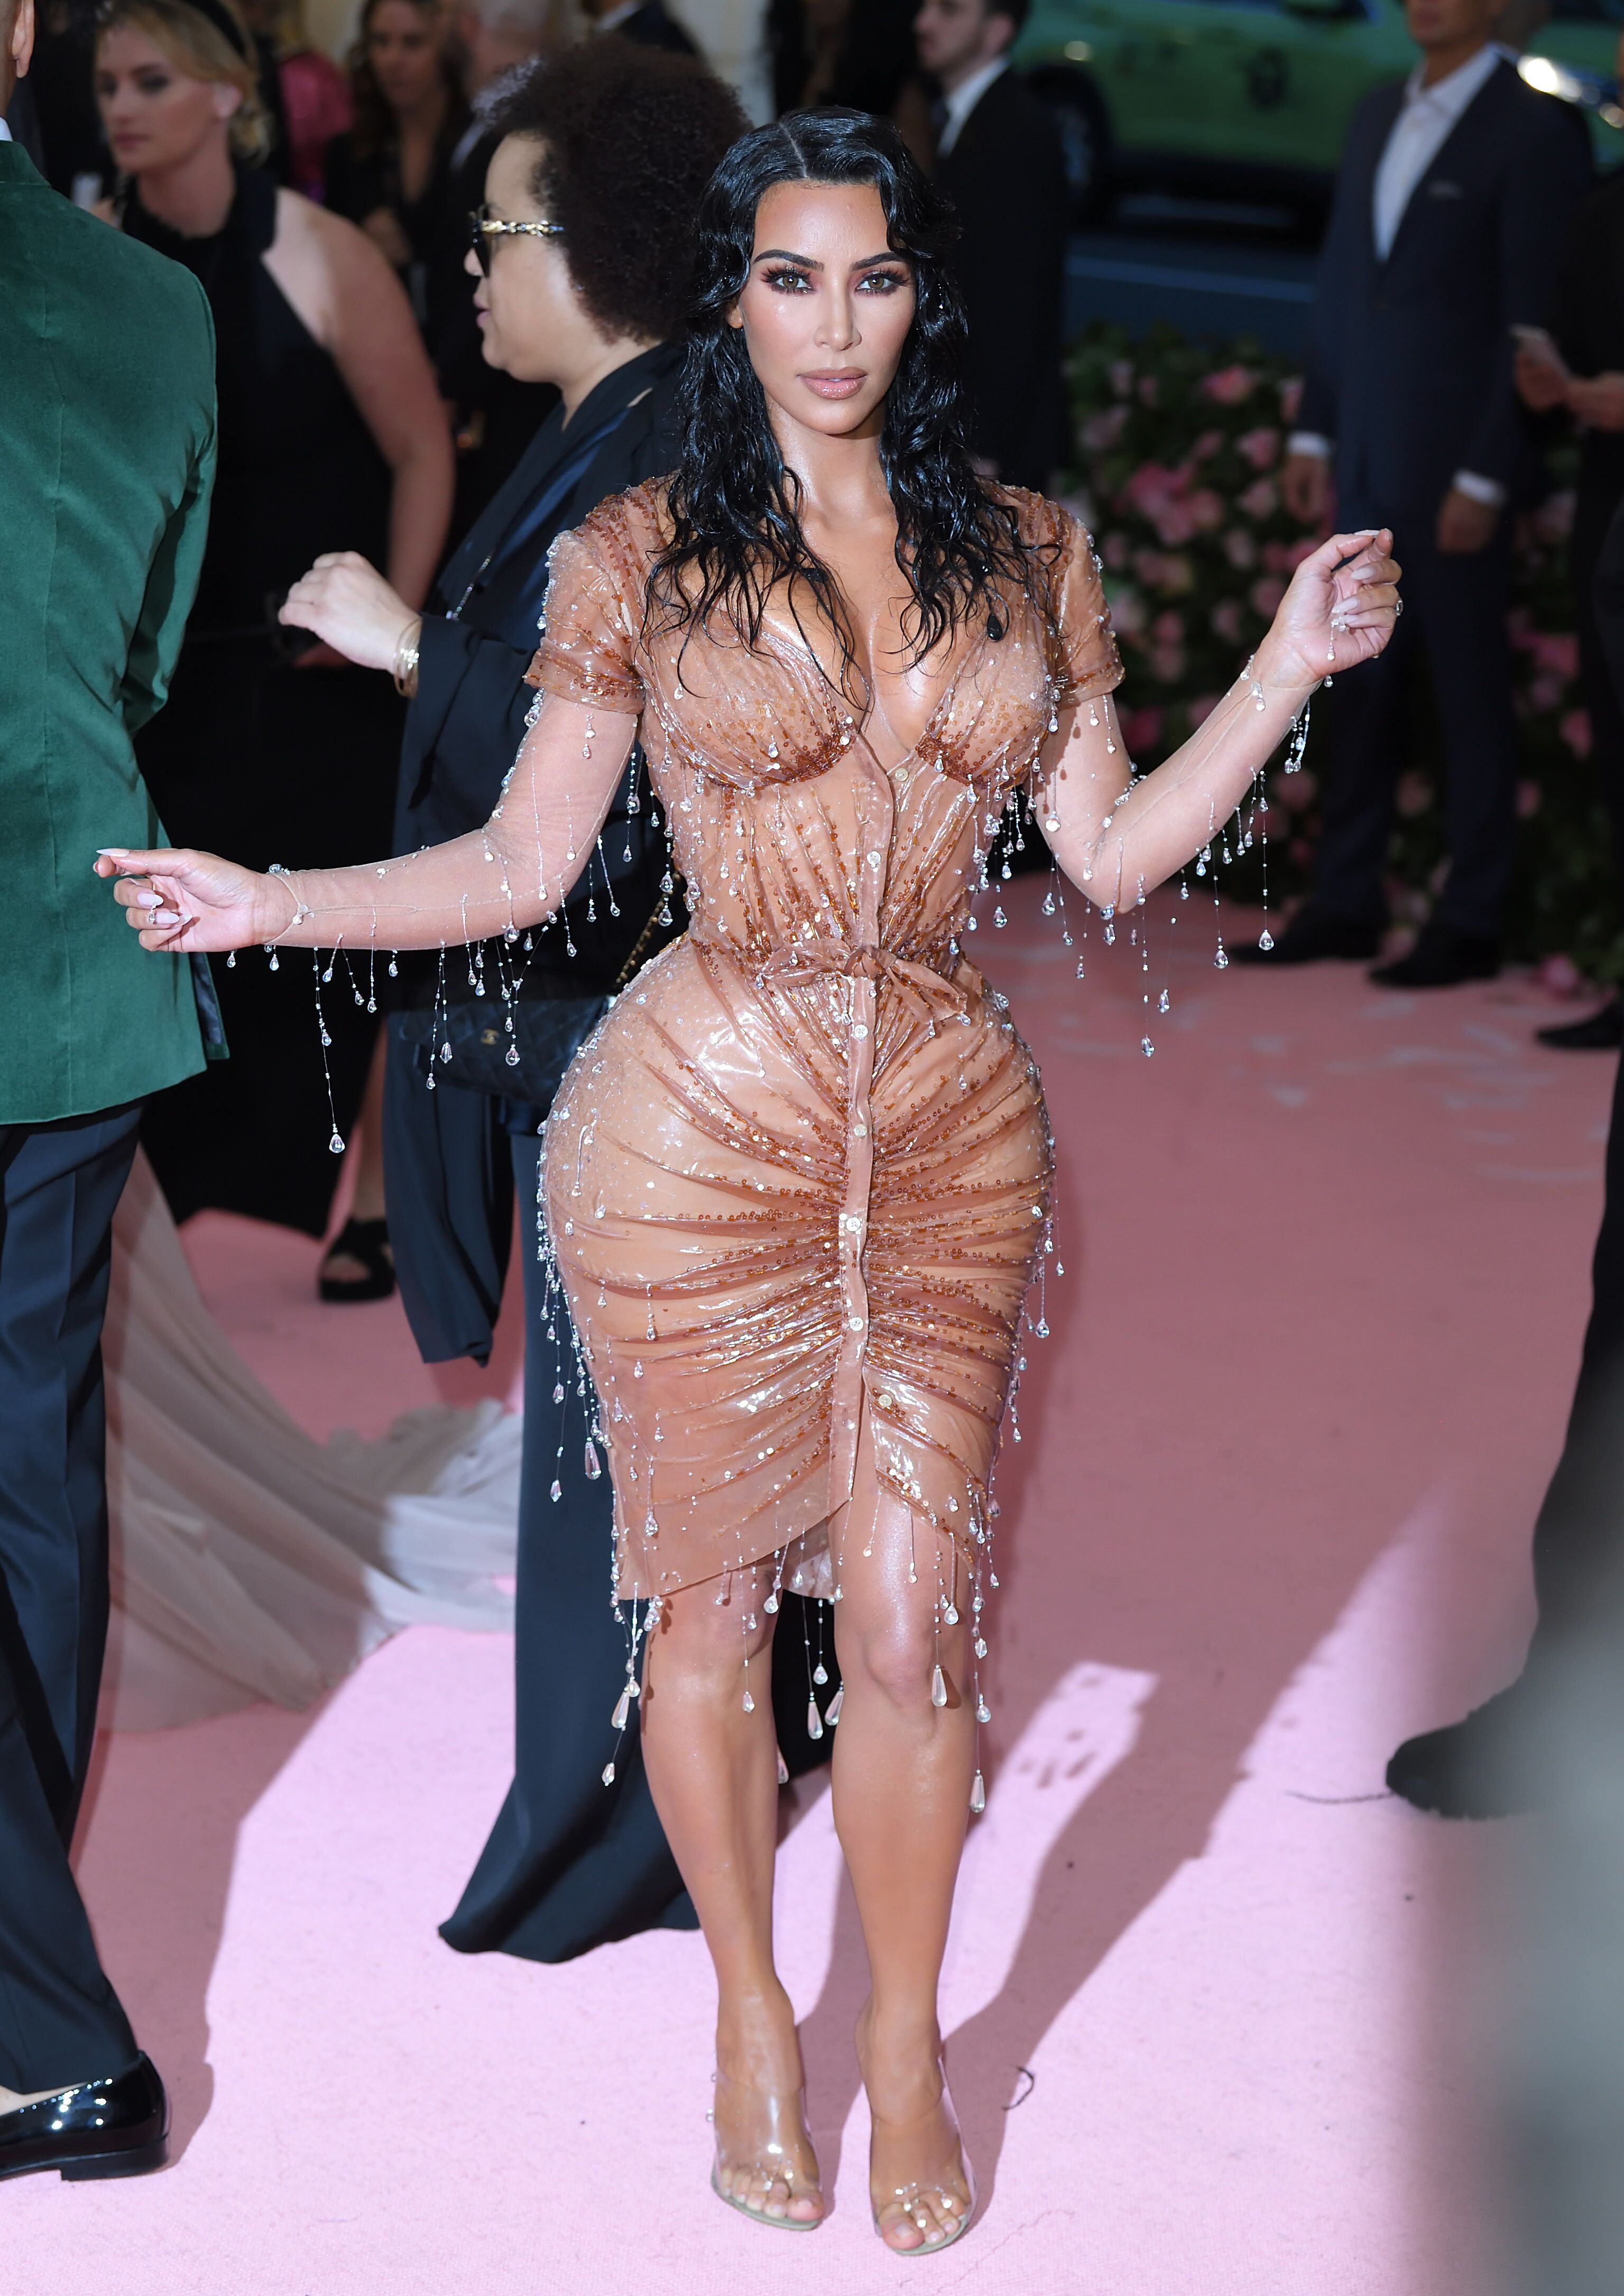 Kim Kardashian West arrives for the 2019 Met Gala celebrating Camp: Notes on Fashion. | Source: Getty Images